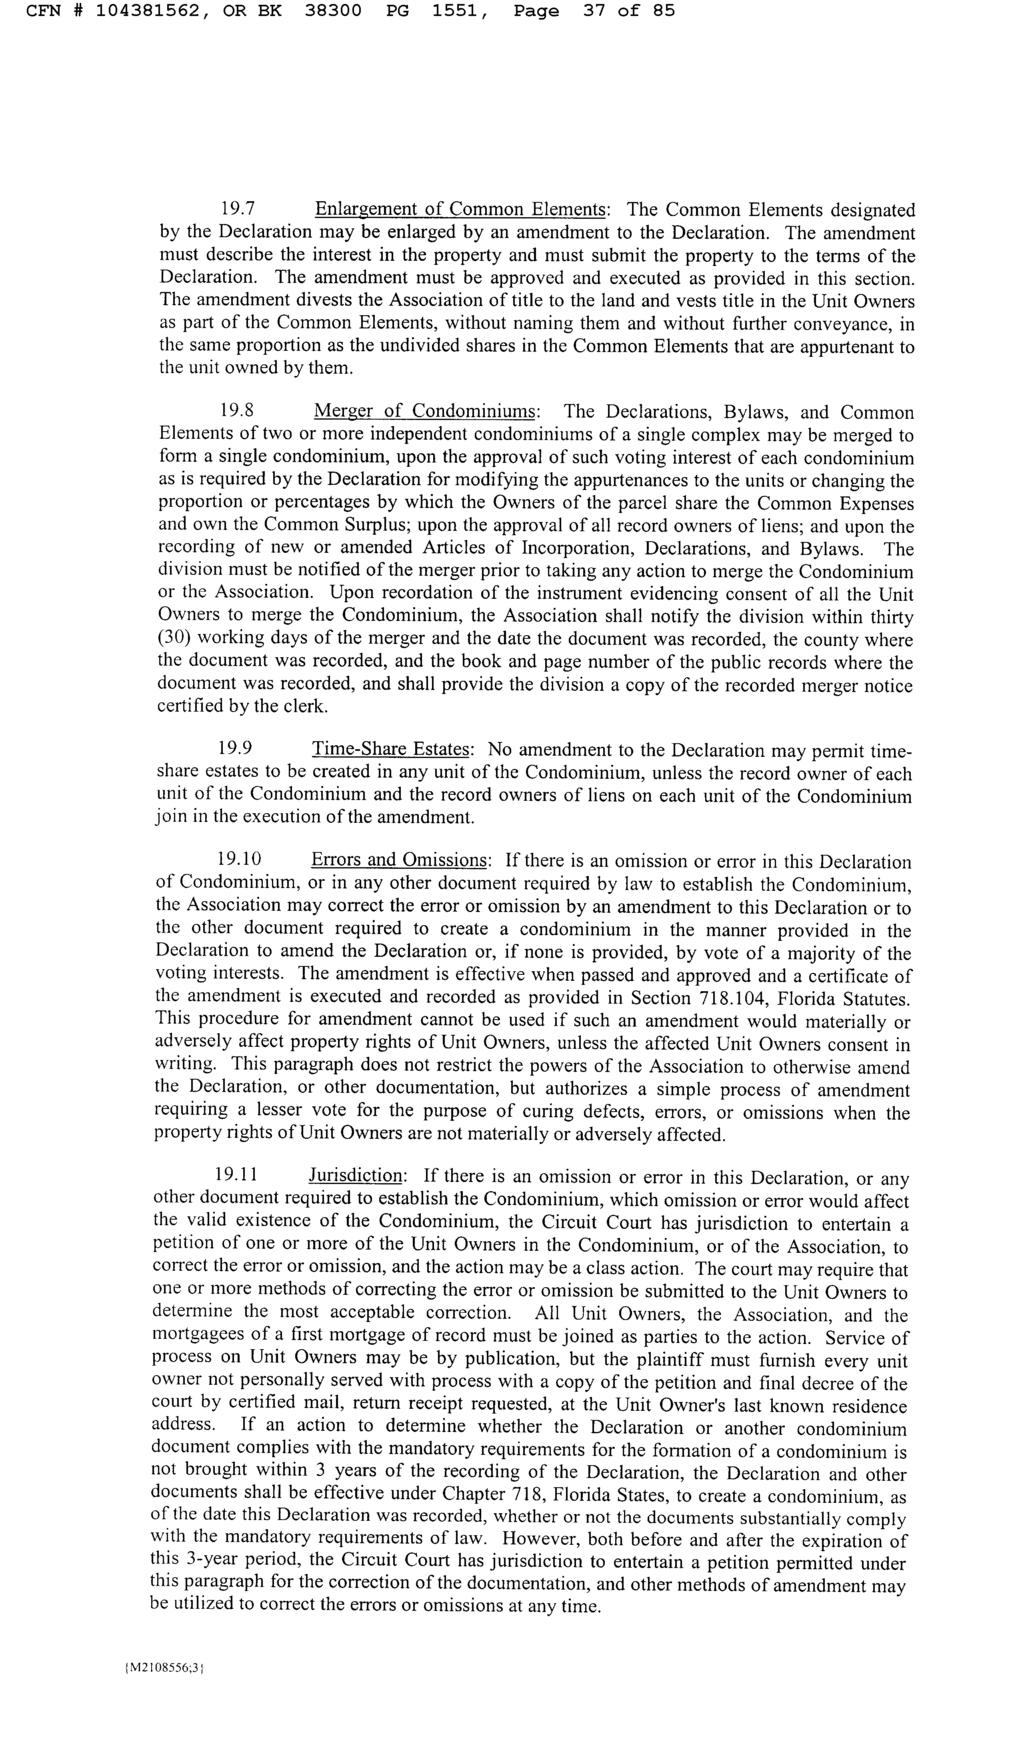 CFN # 104381562, OR BK 38300 PG 1551, Page 37 of 85 19.7 Enlargement of Common Elements: The Common Elements designated by the Declaration may be enlarged by an amendment to the Declaration.